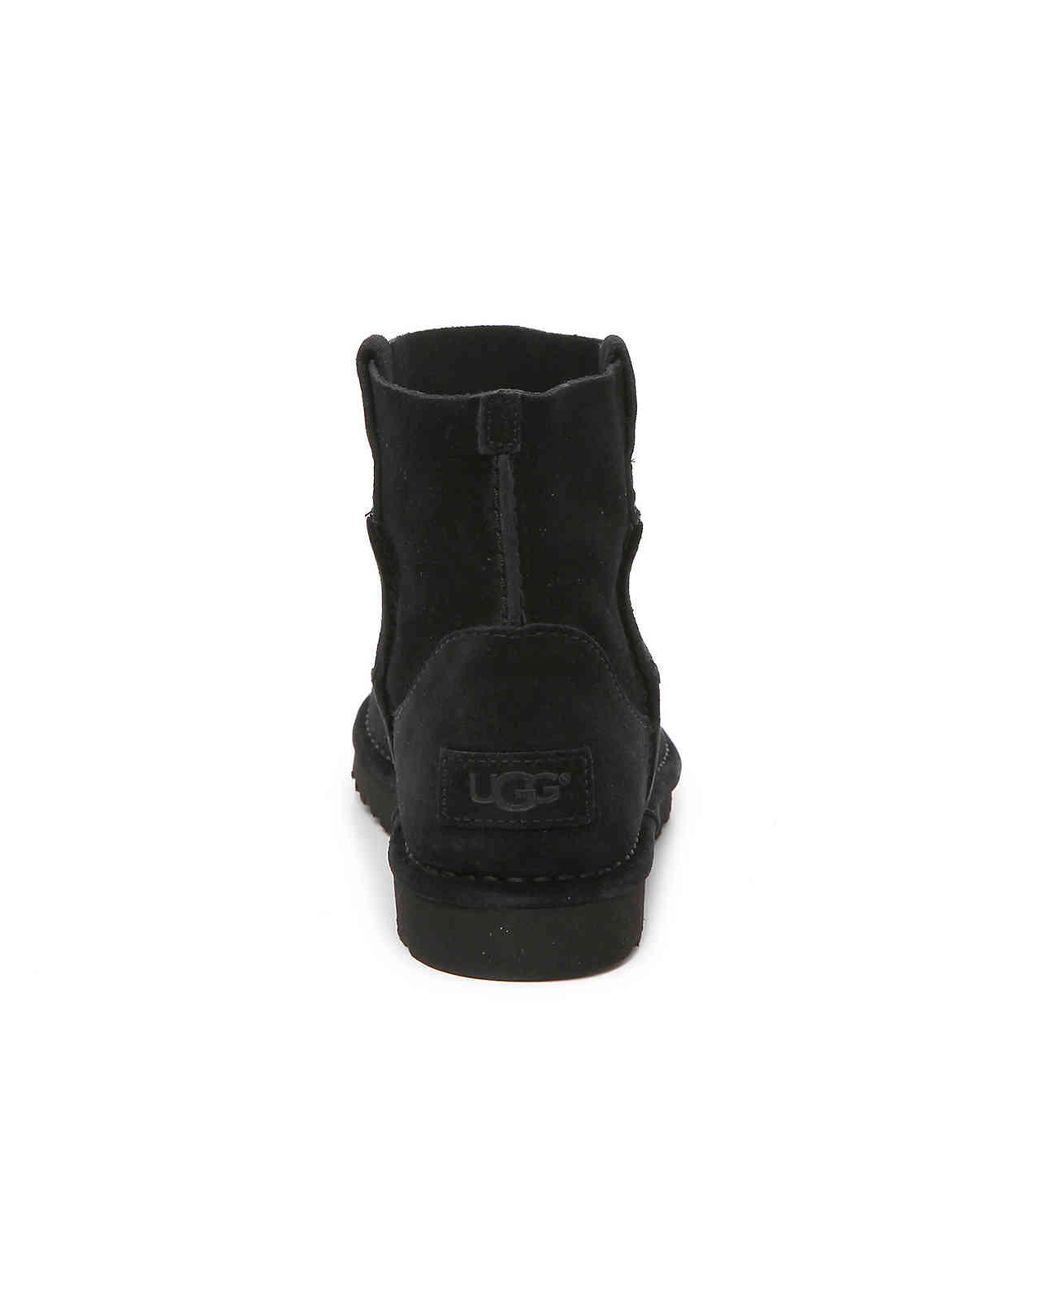 Ugg Unlined Booties on Sale, 56% OFF | www.osana.care